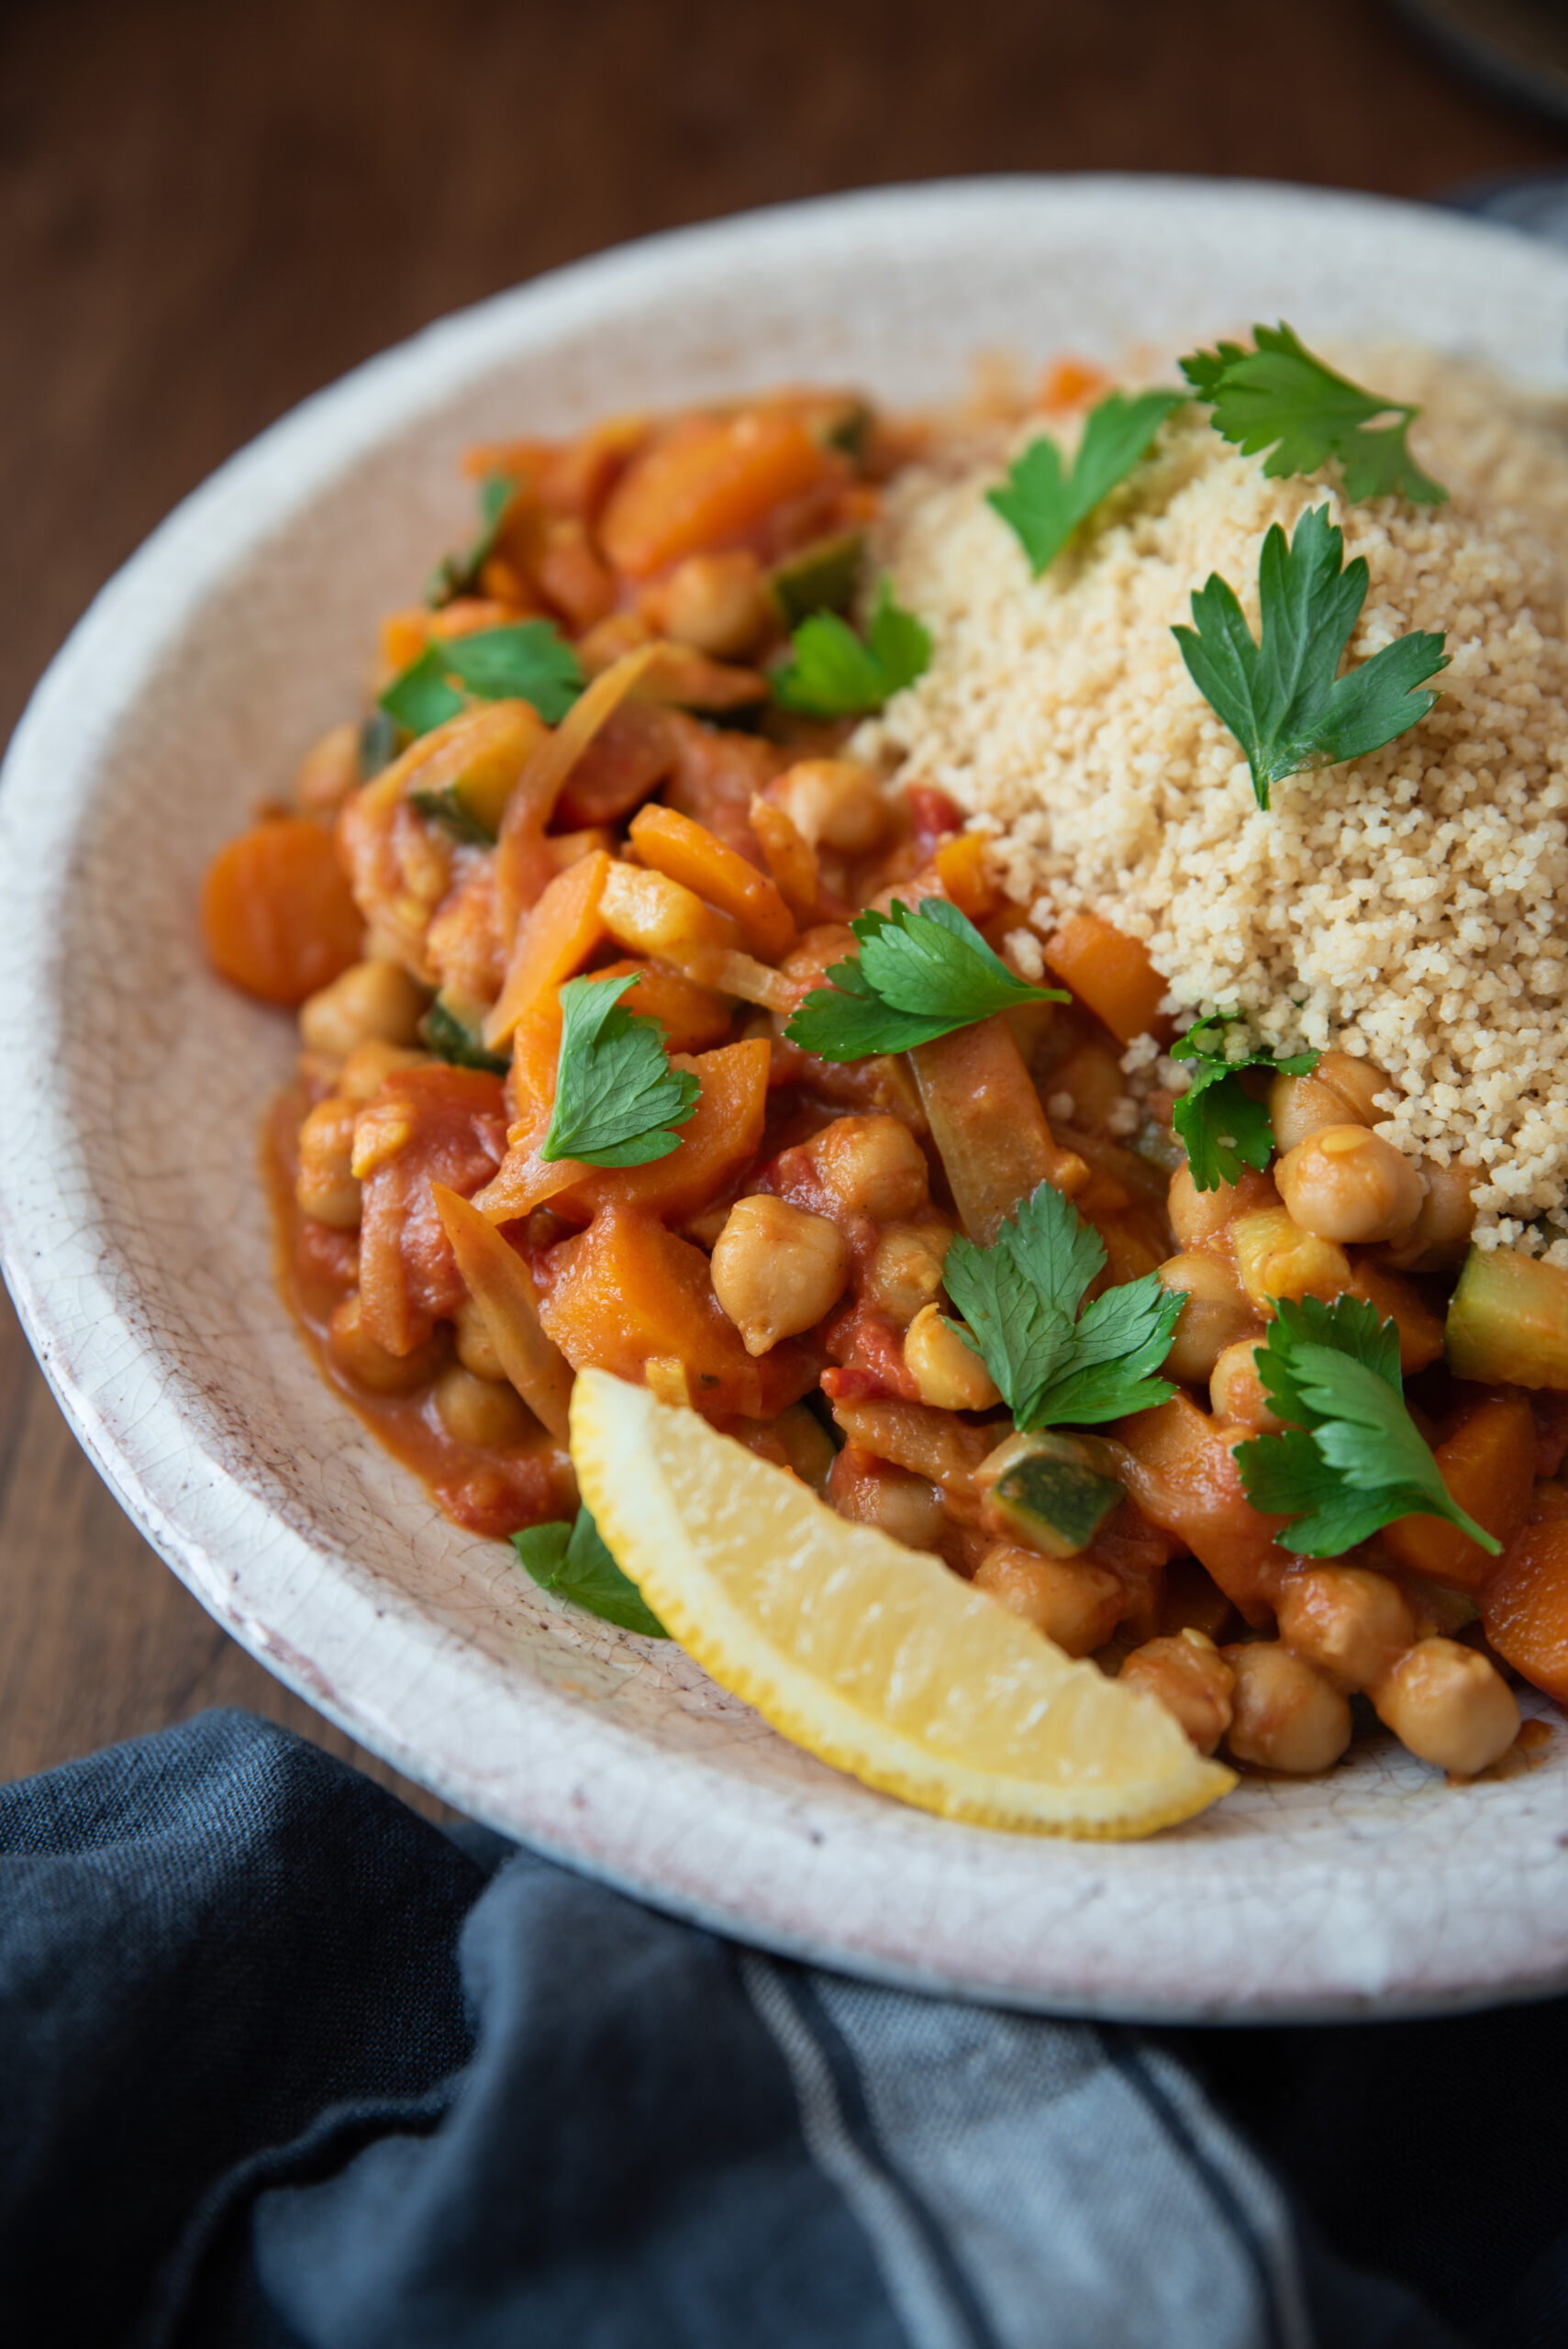 Vegetable curry with chickpeas and coconut milk